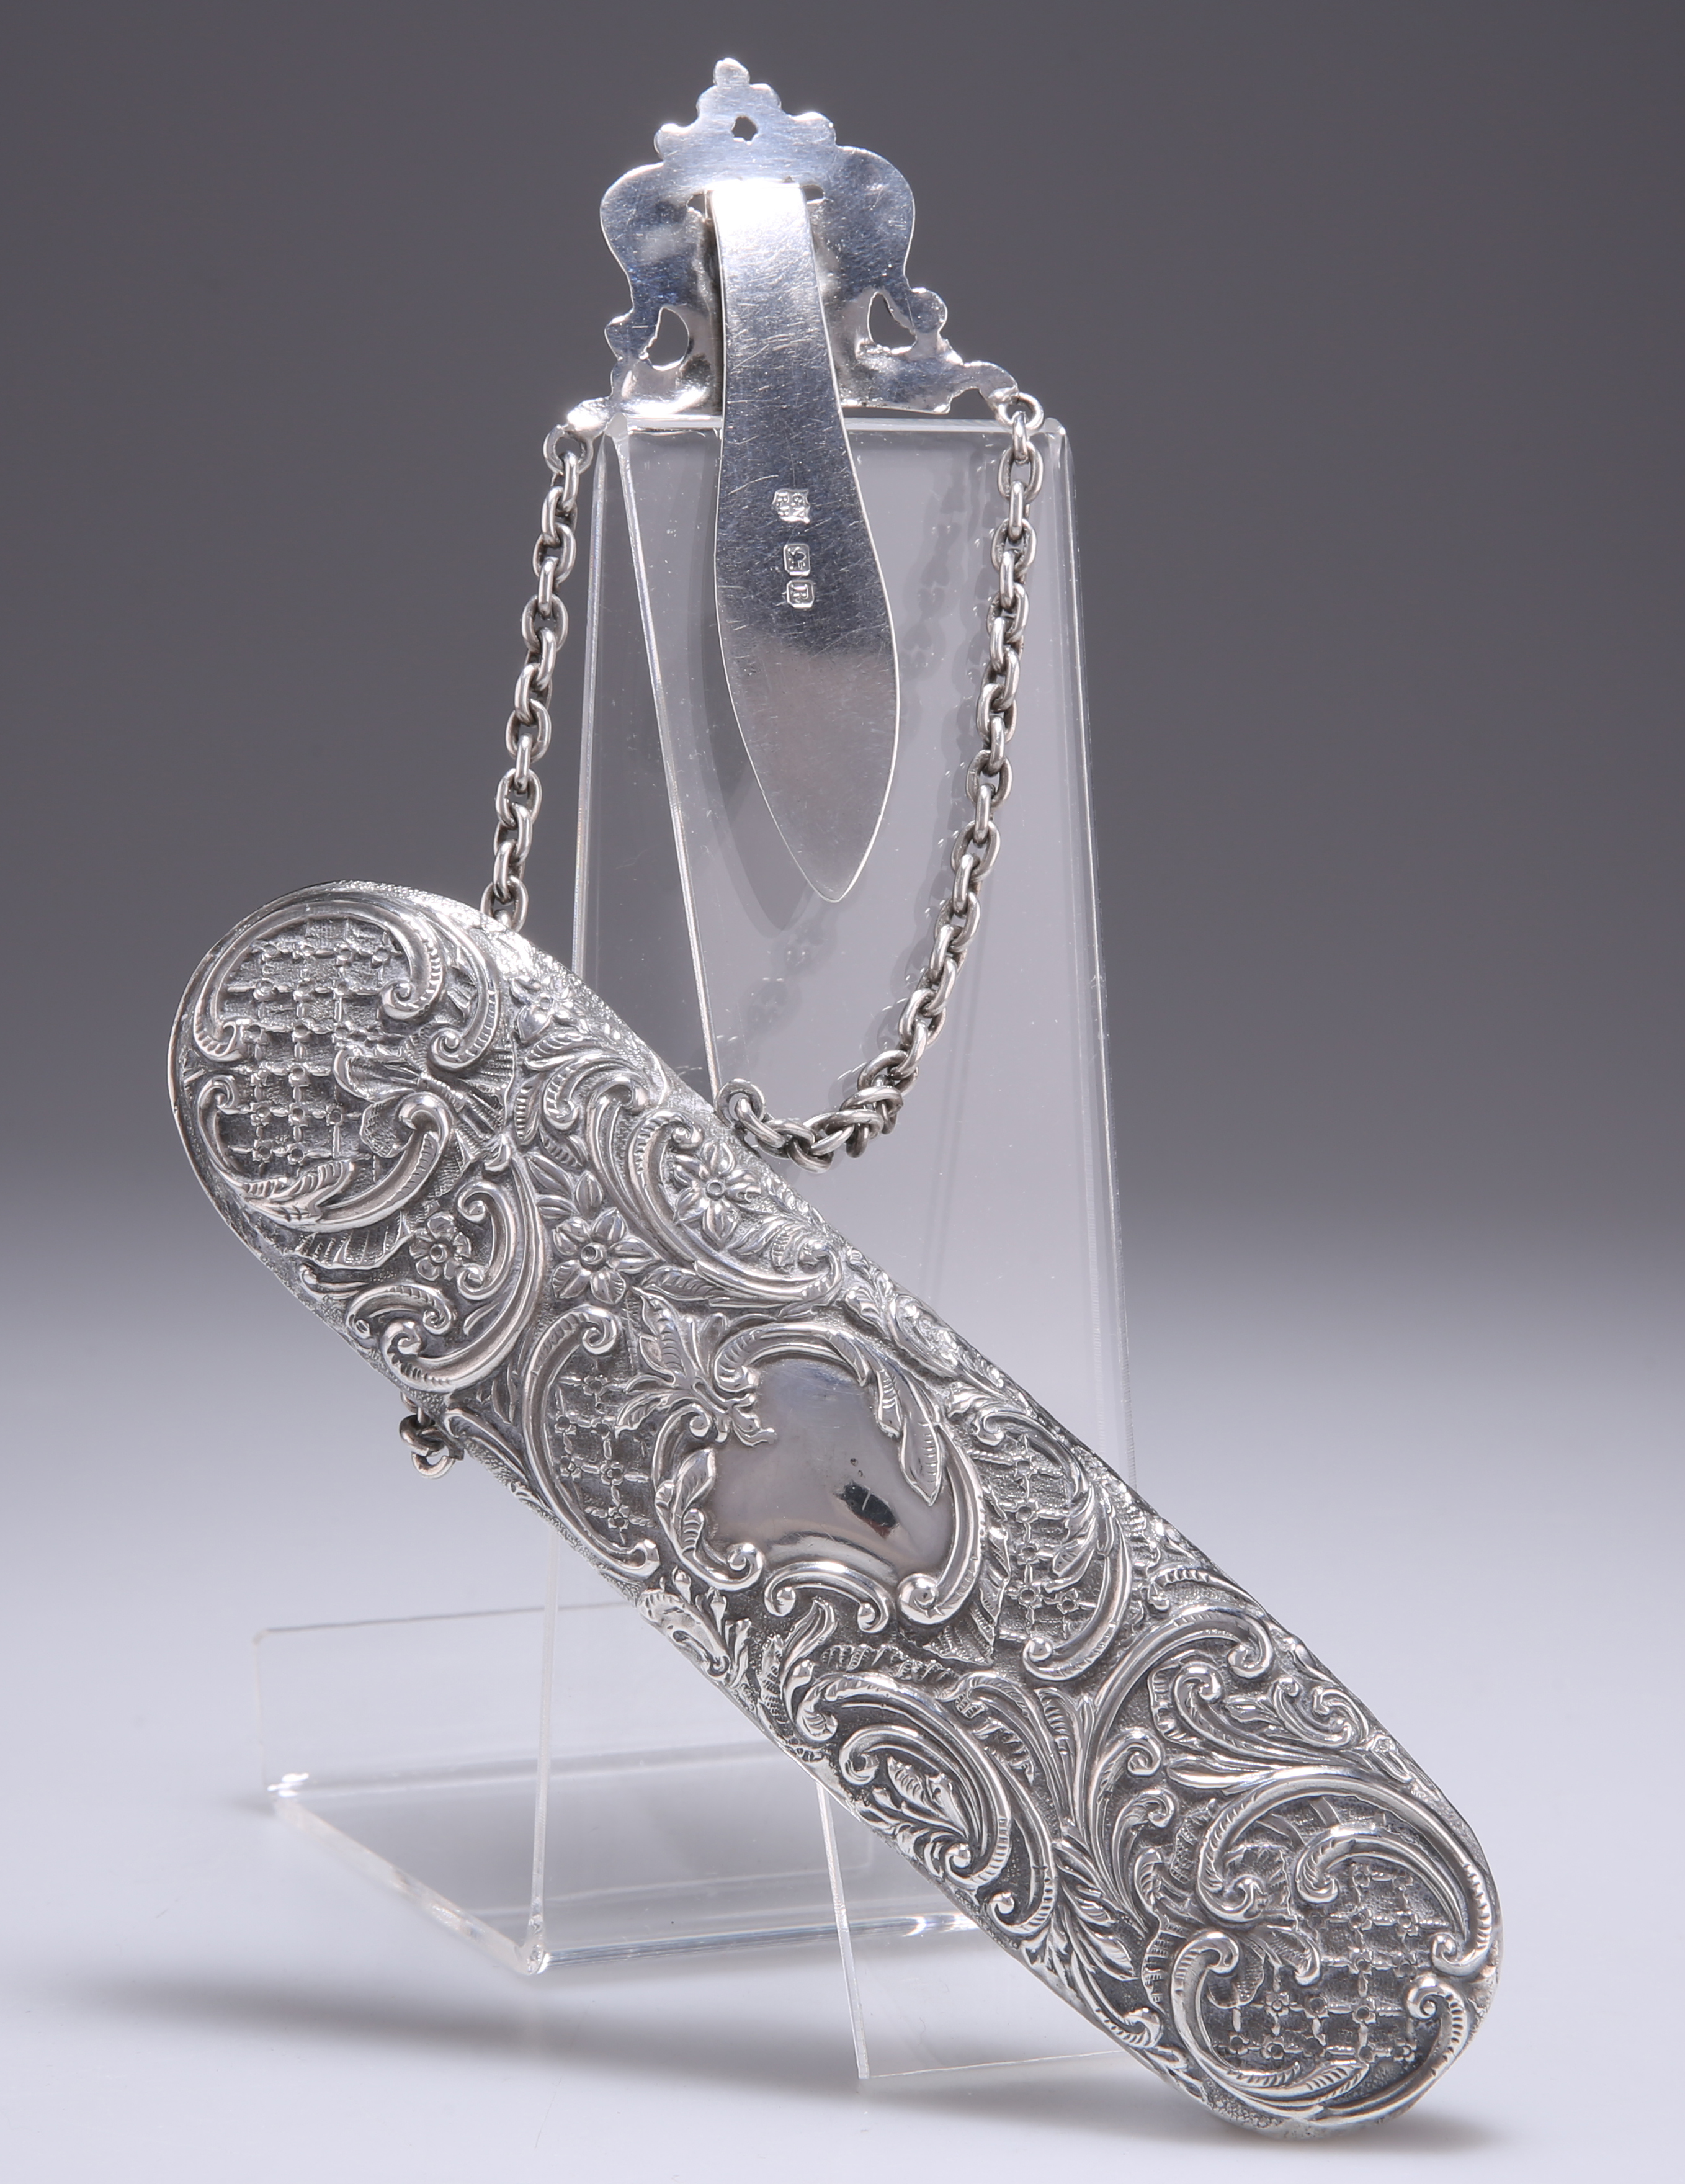 A LATE VICTORIAN SILVER CHATELAINE SPECTACLES CASE - Image 2 of 3